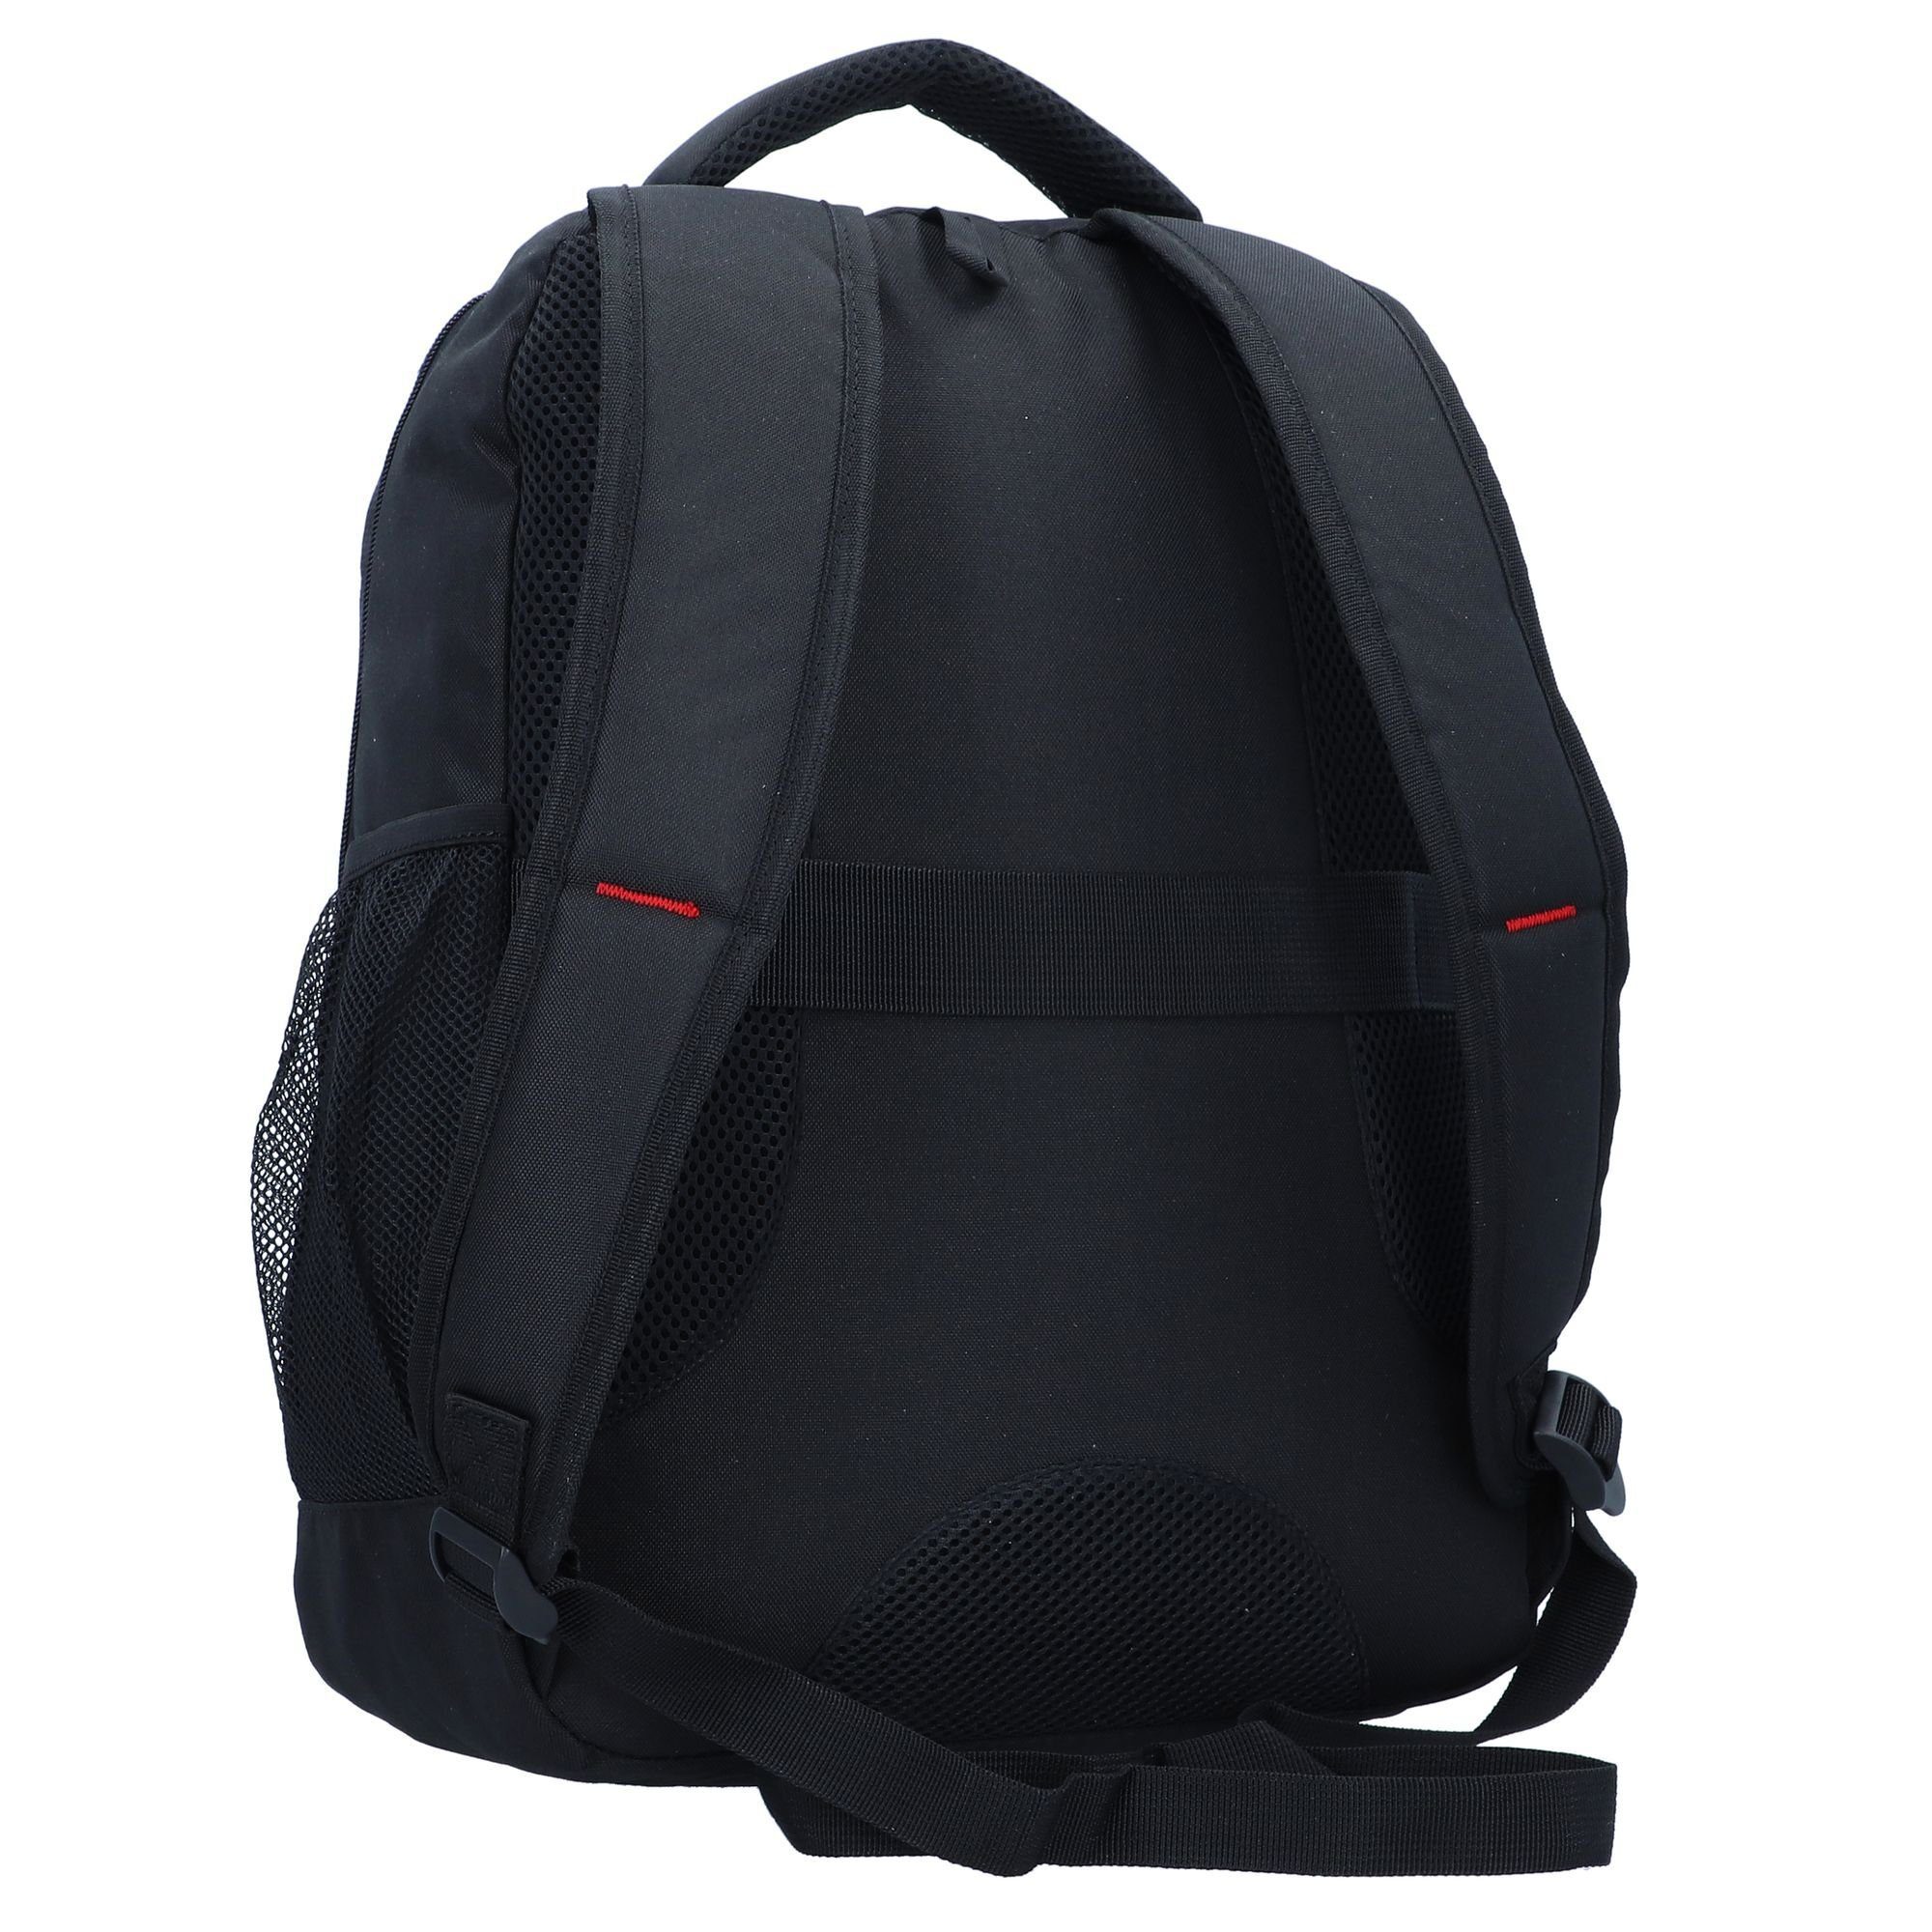 black GROOVE, Tourister® American URBAN Polyester Daypack